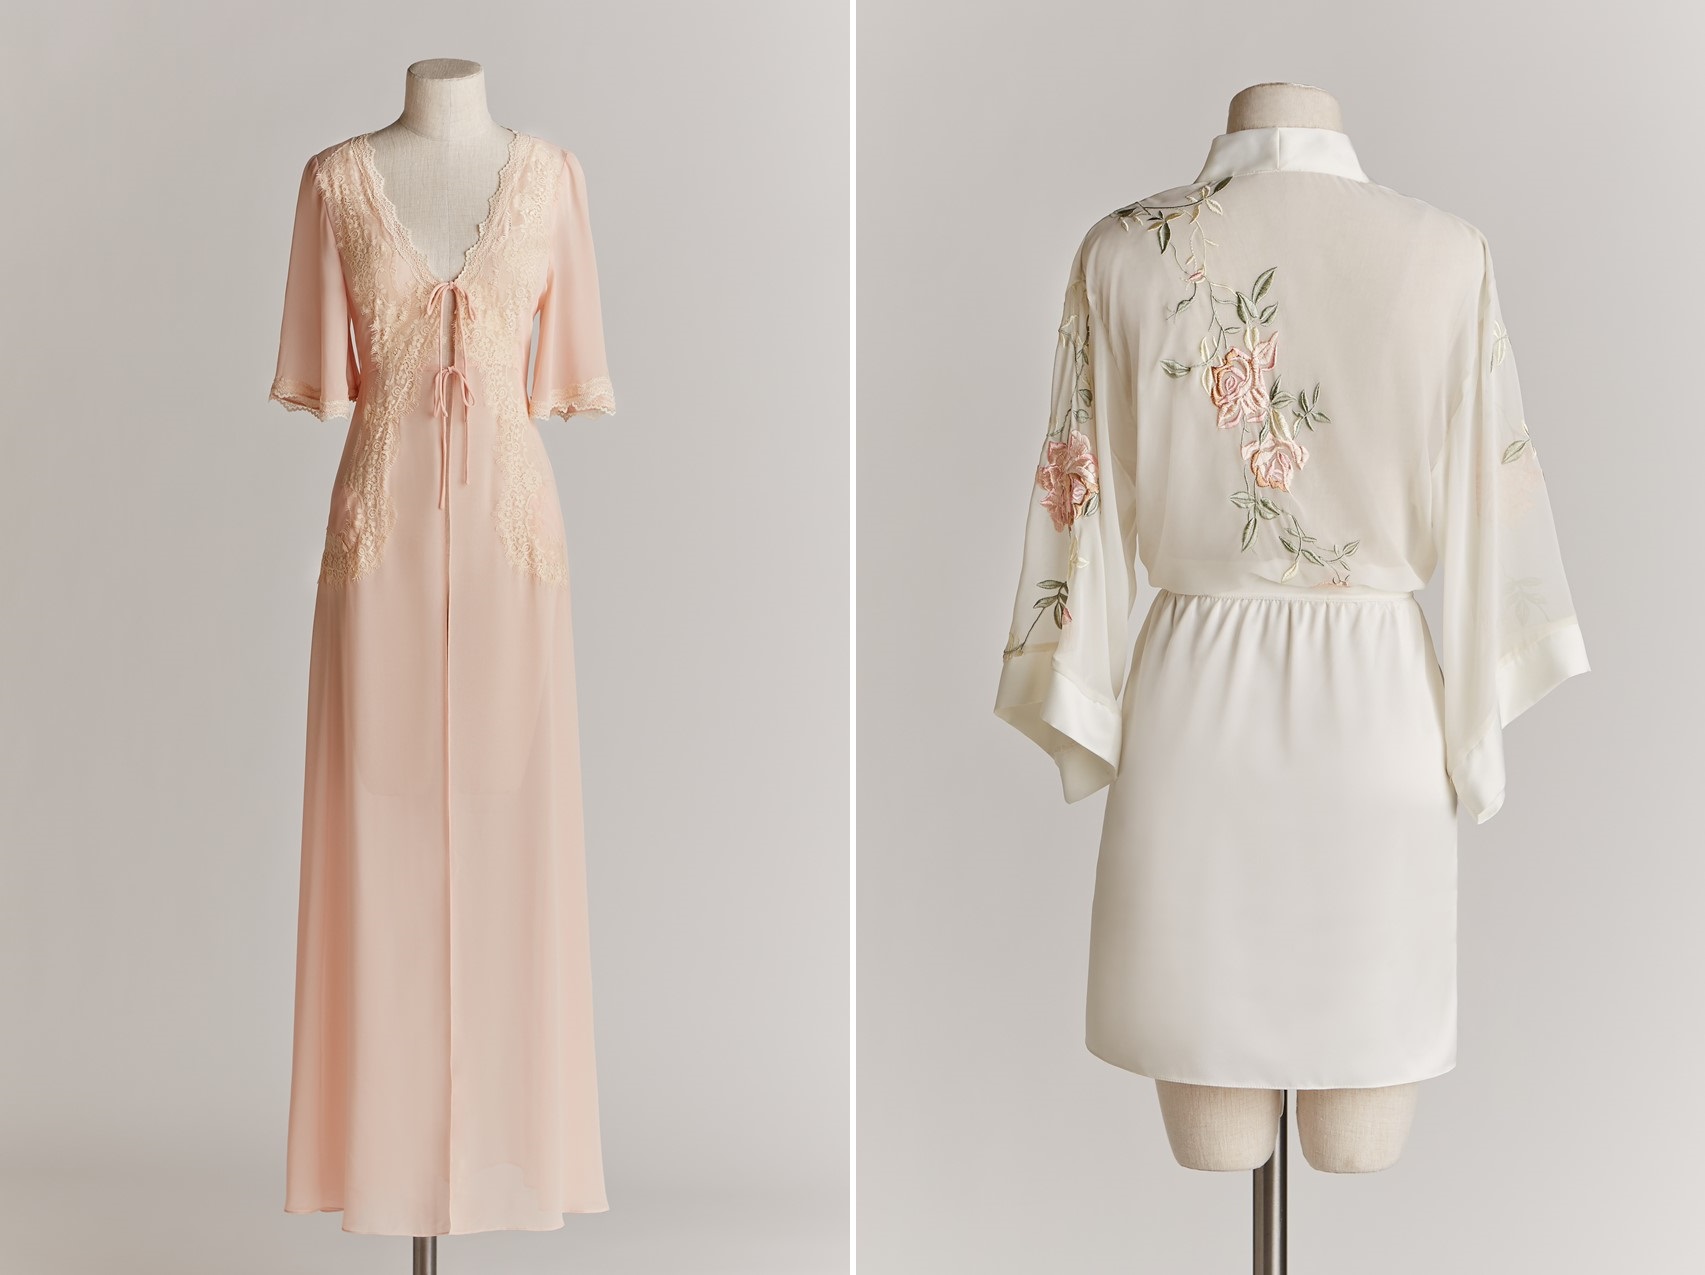 Arianna & Sweet Pea Robes from BHLDN's Stunning Fall 2015 Collection ‘Twice Enchanted’